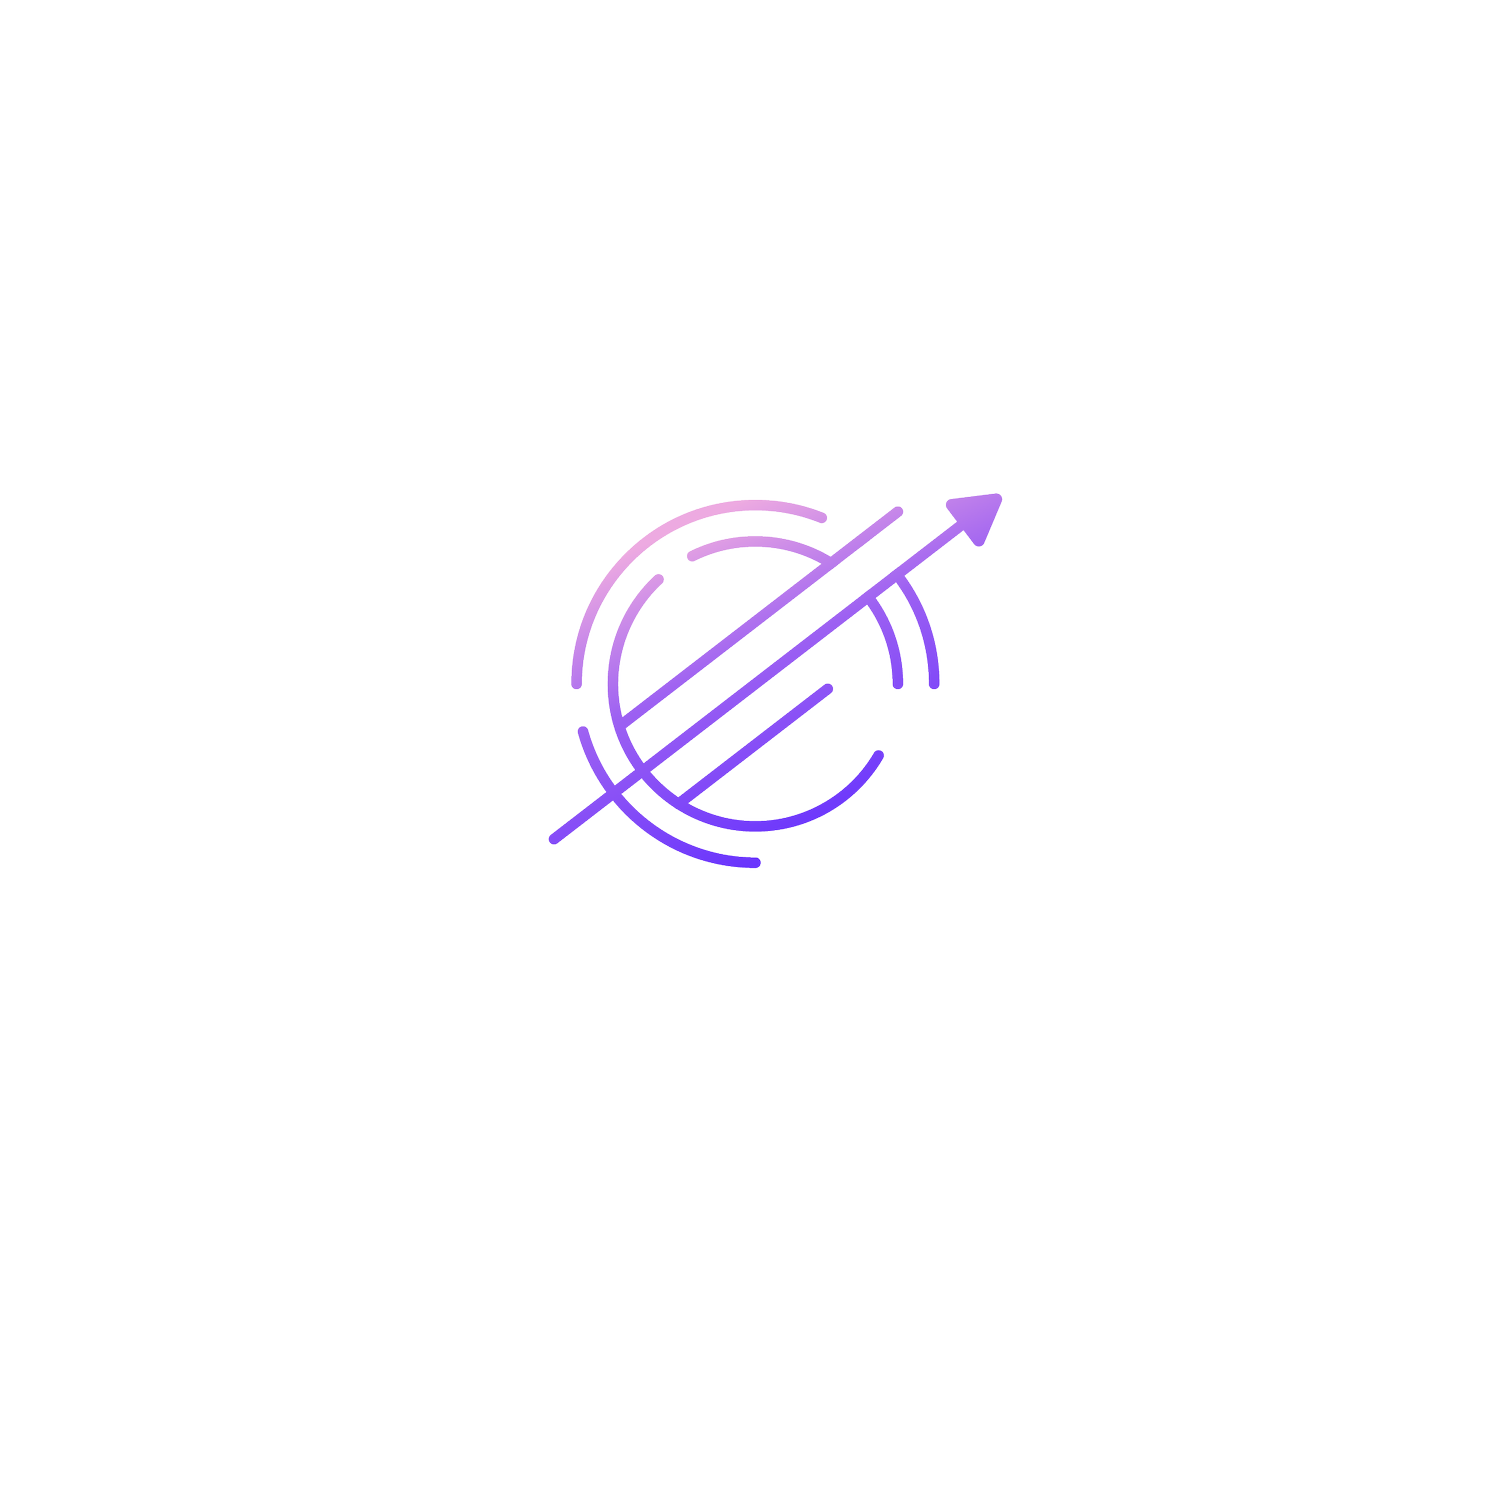 Little Candle Marketing